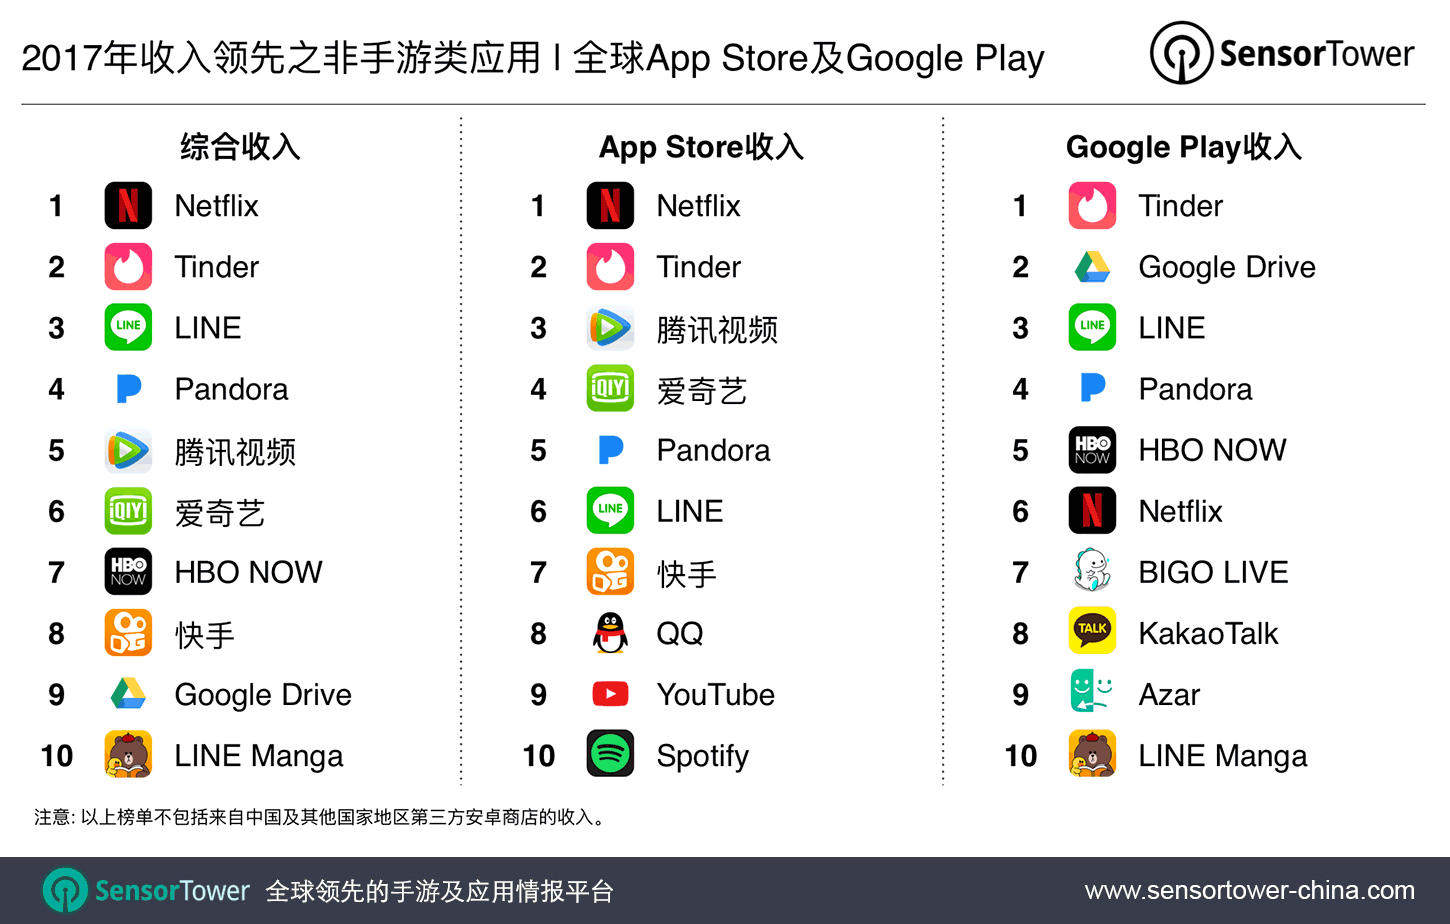 2017's Top Mobile Apps by Revenue CN